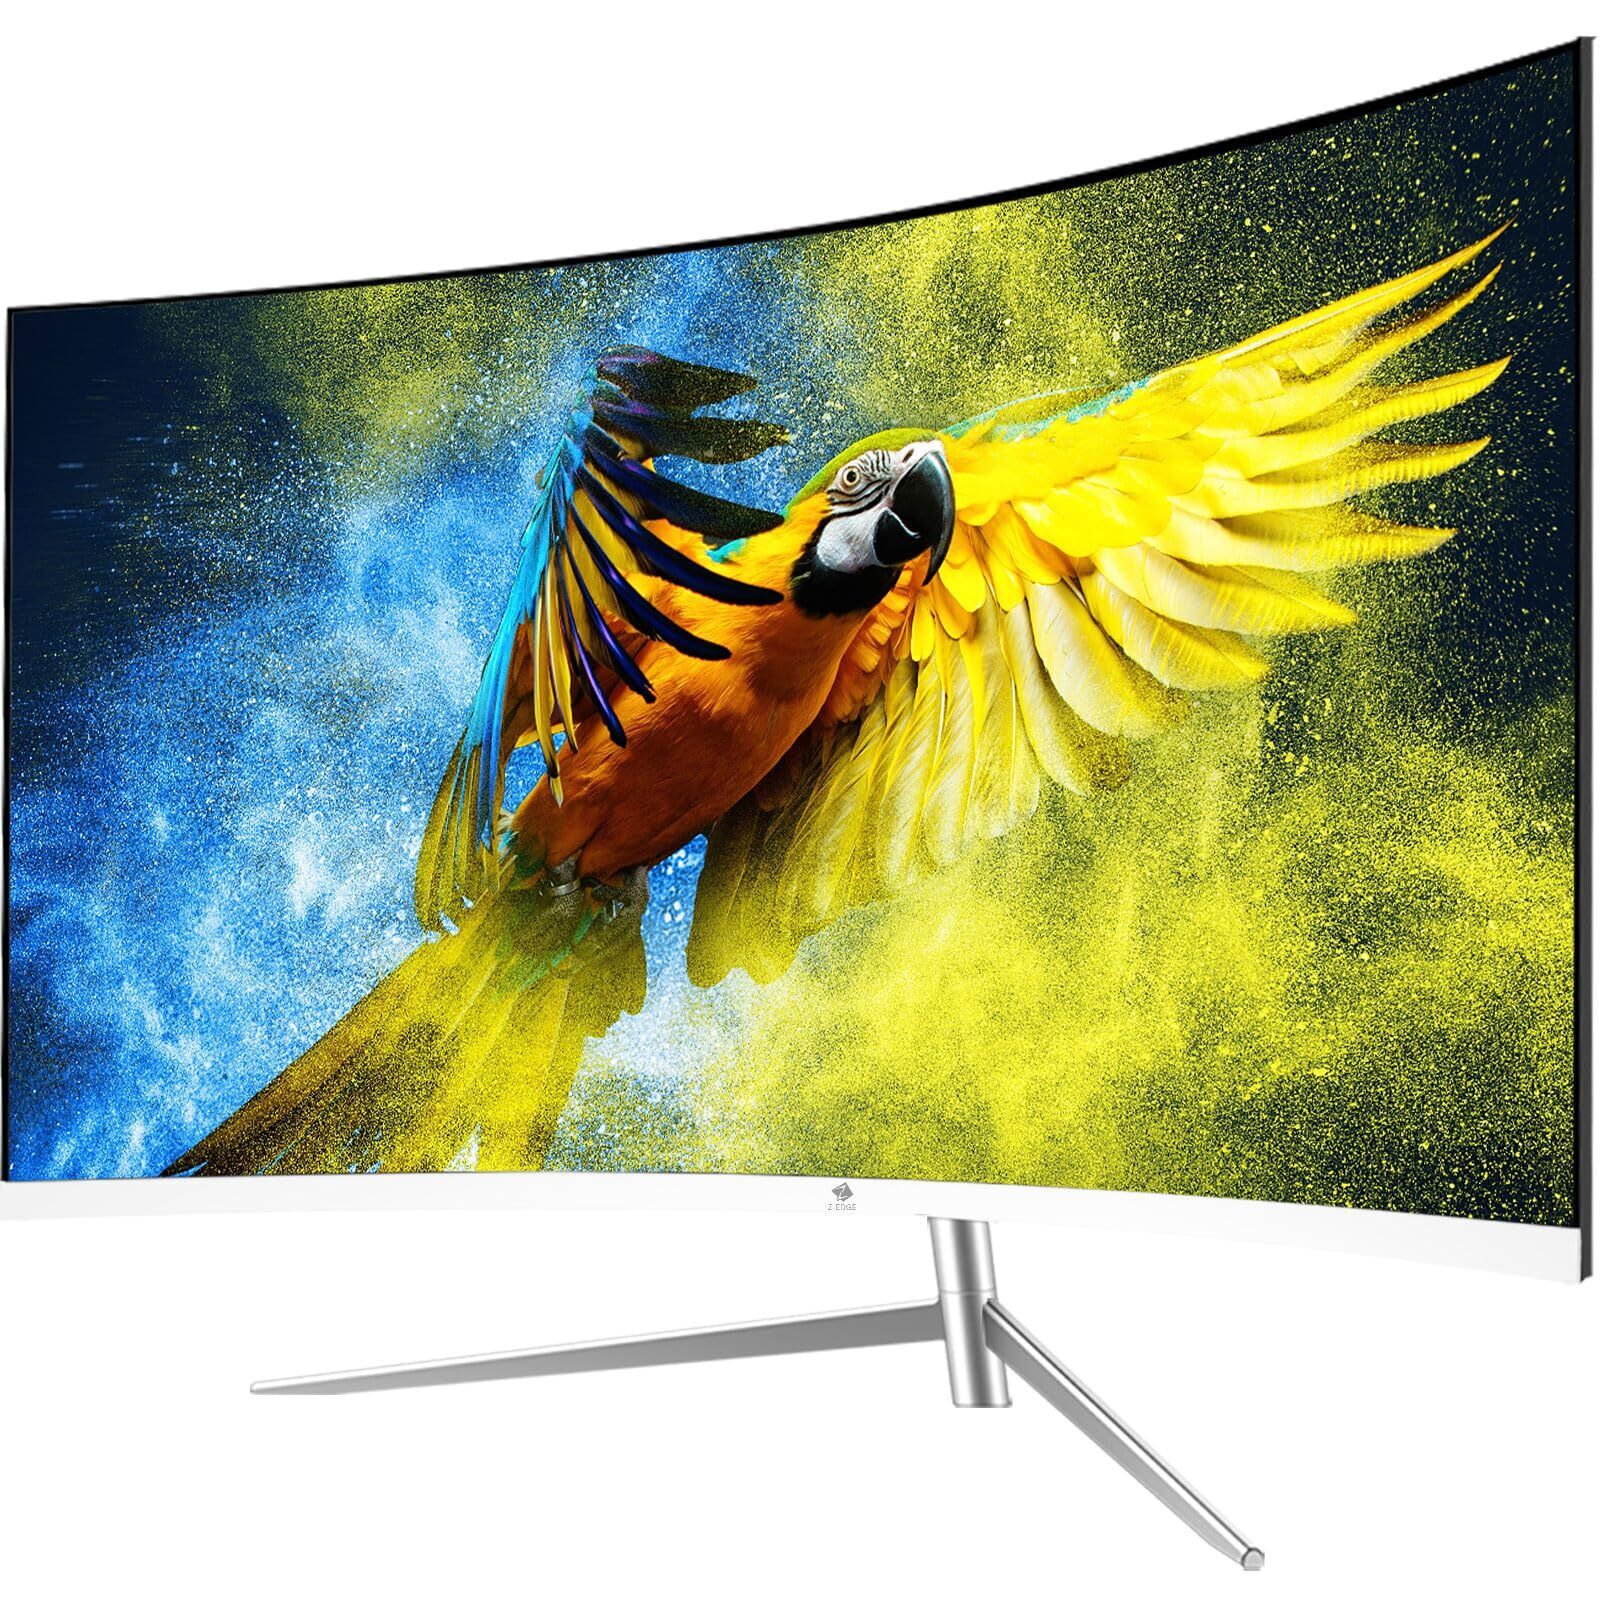 Z-Edge 27-inch Curved Gaming Monitor, Full HD 1080P 1920x1080 LED Backlight M...